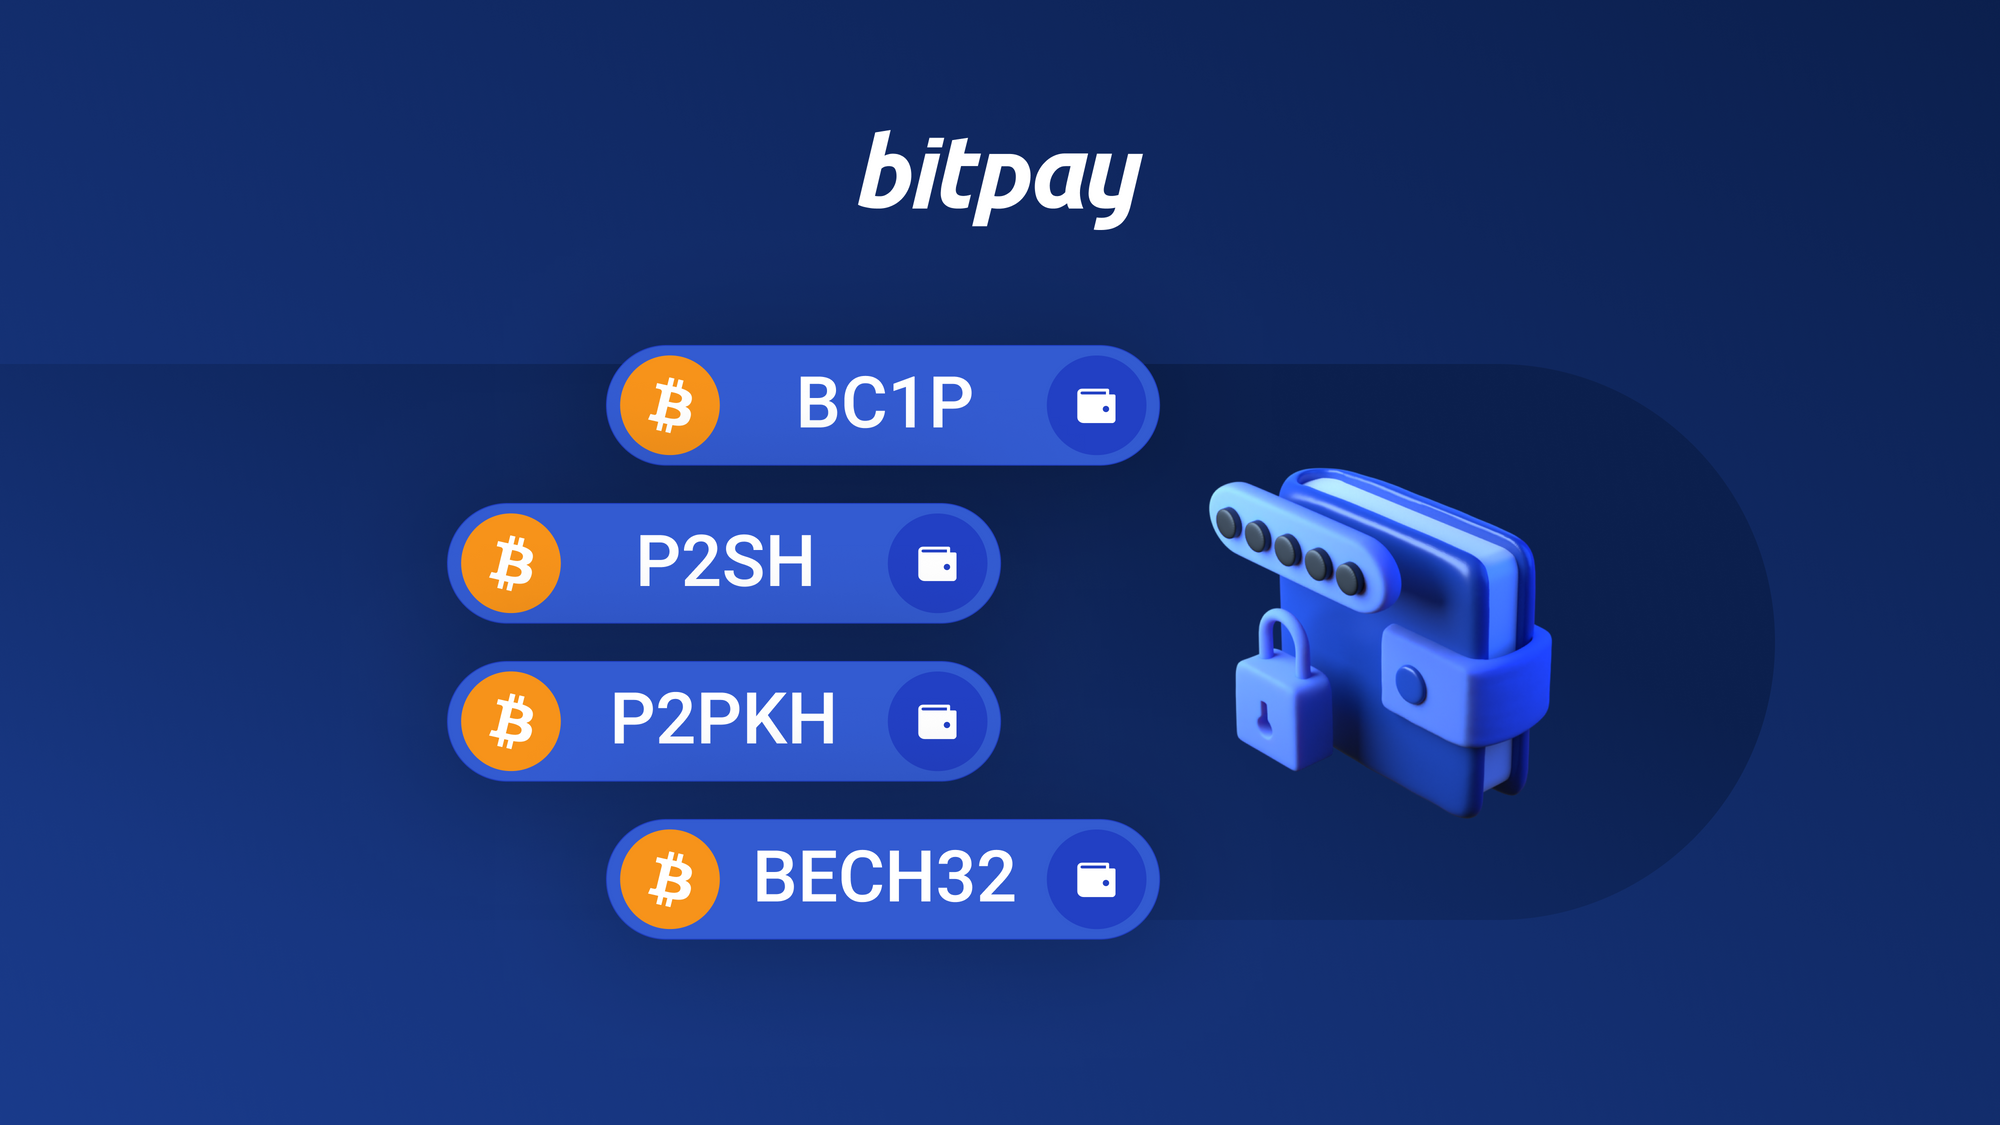 What type of Bitcoin address should I use?